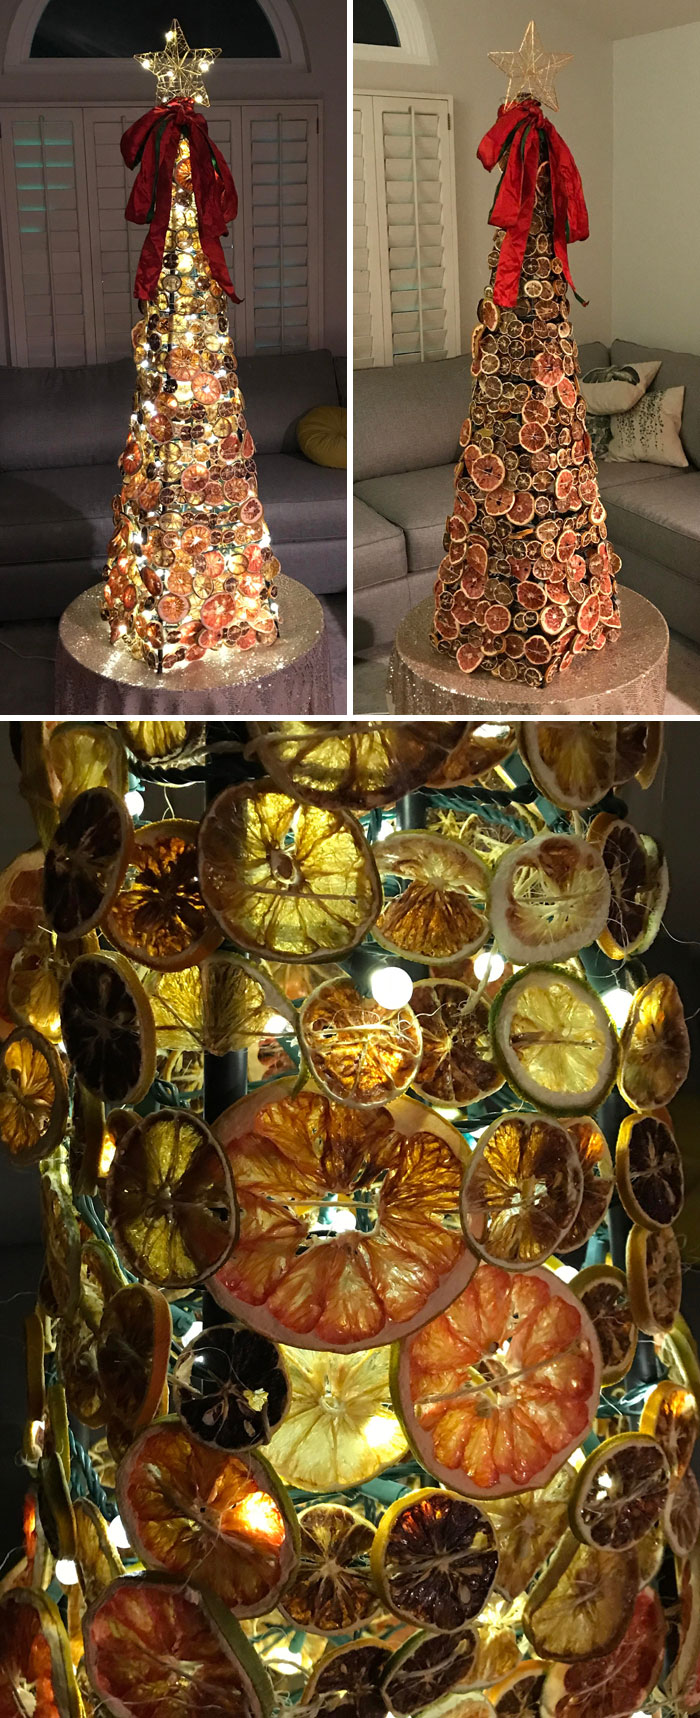 I Made A Thing! Christmas Tree Made From Dehydrated Citrus Slices